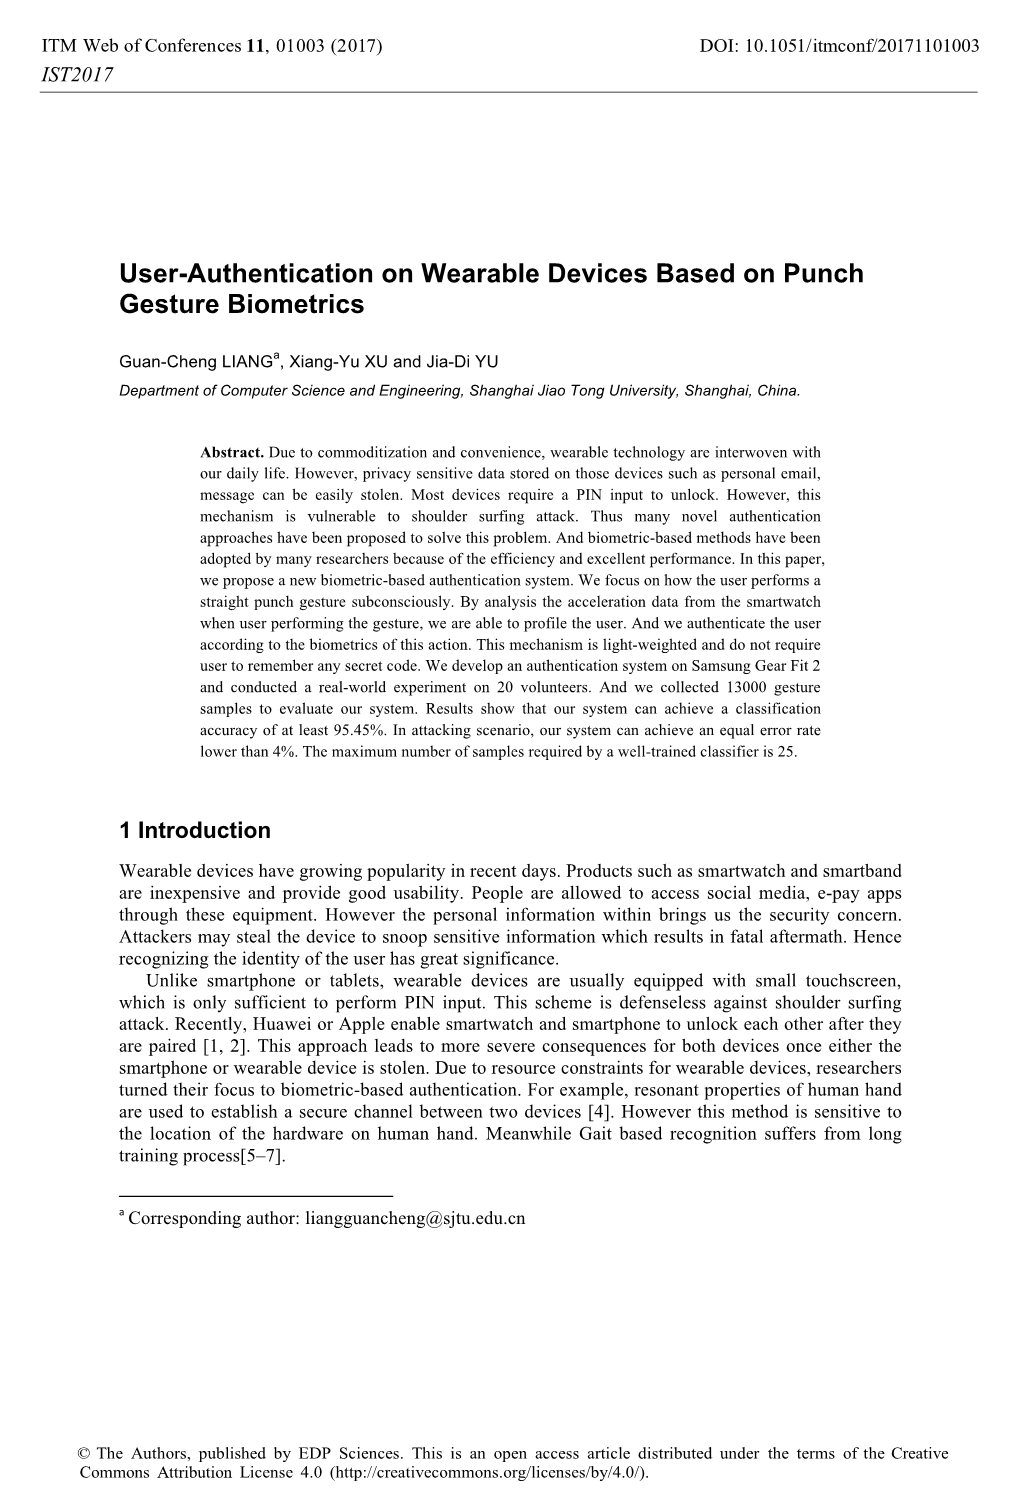 User-Authentication on Wearable Devices Based on Punch Gesture Biometrics